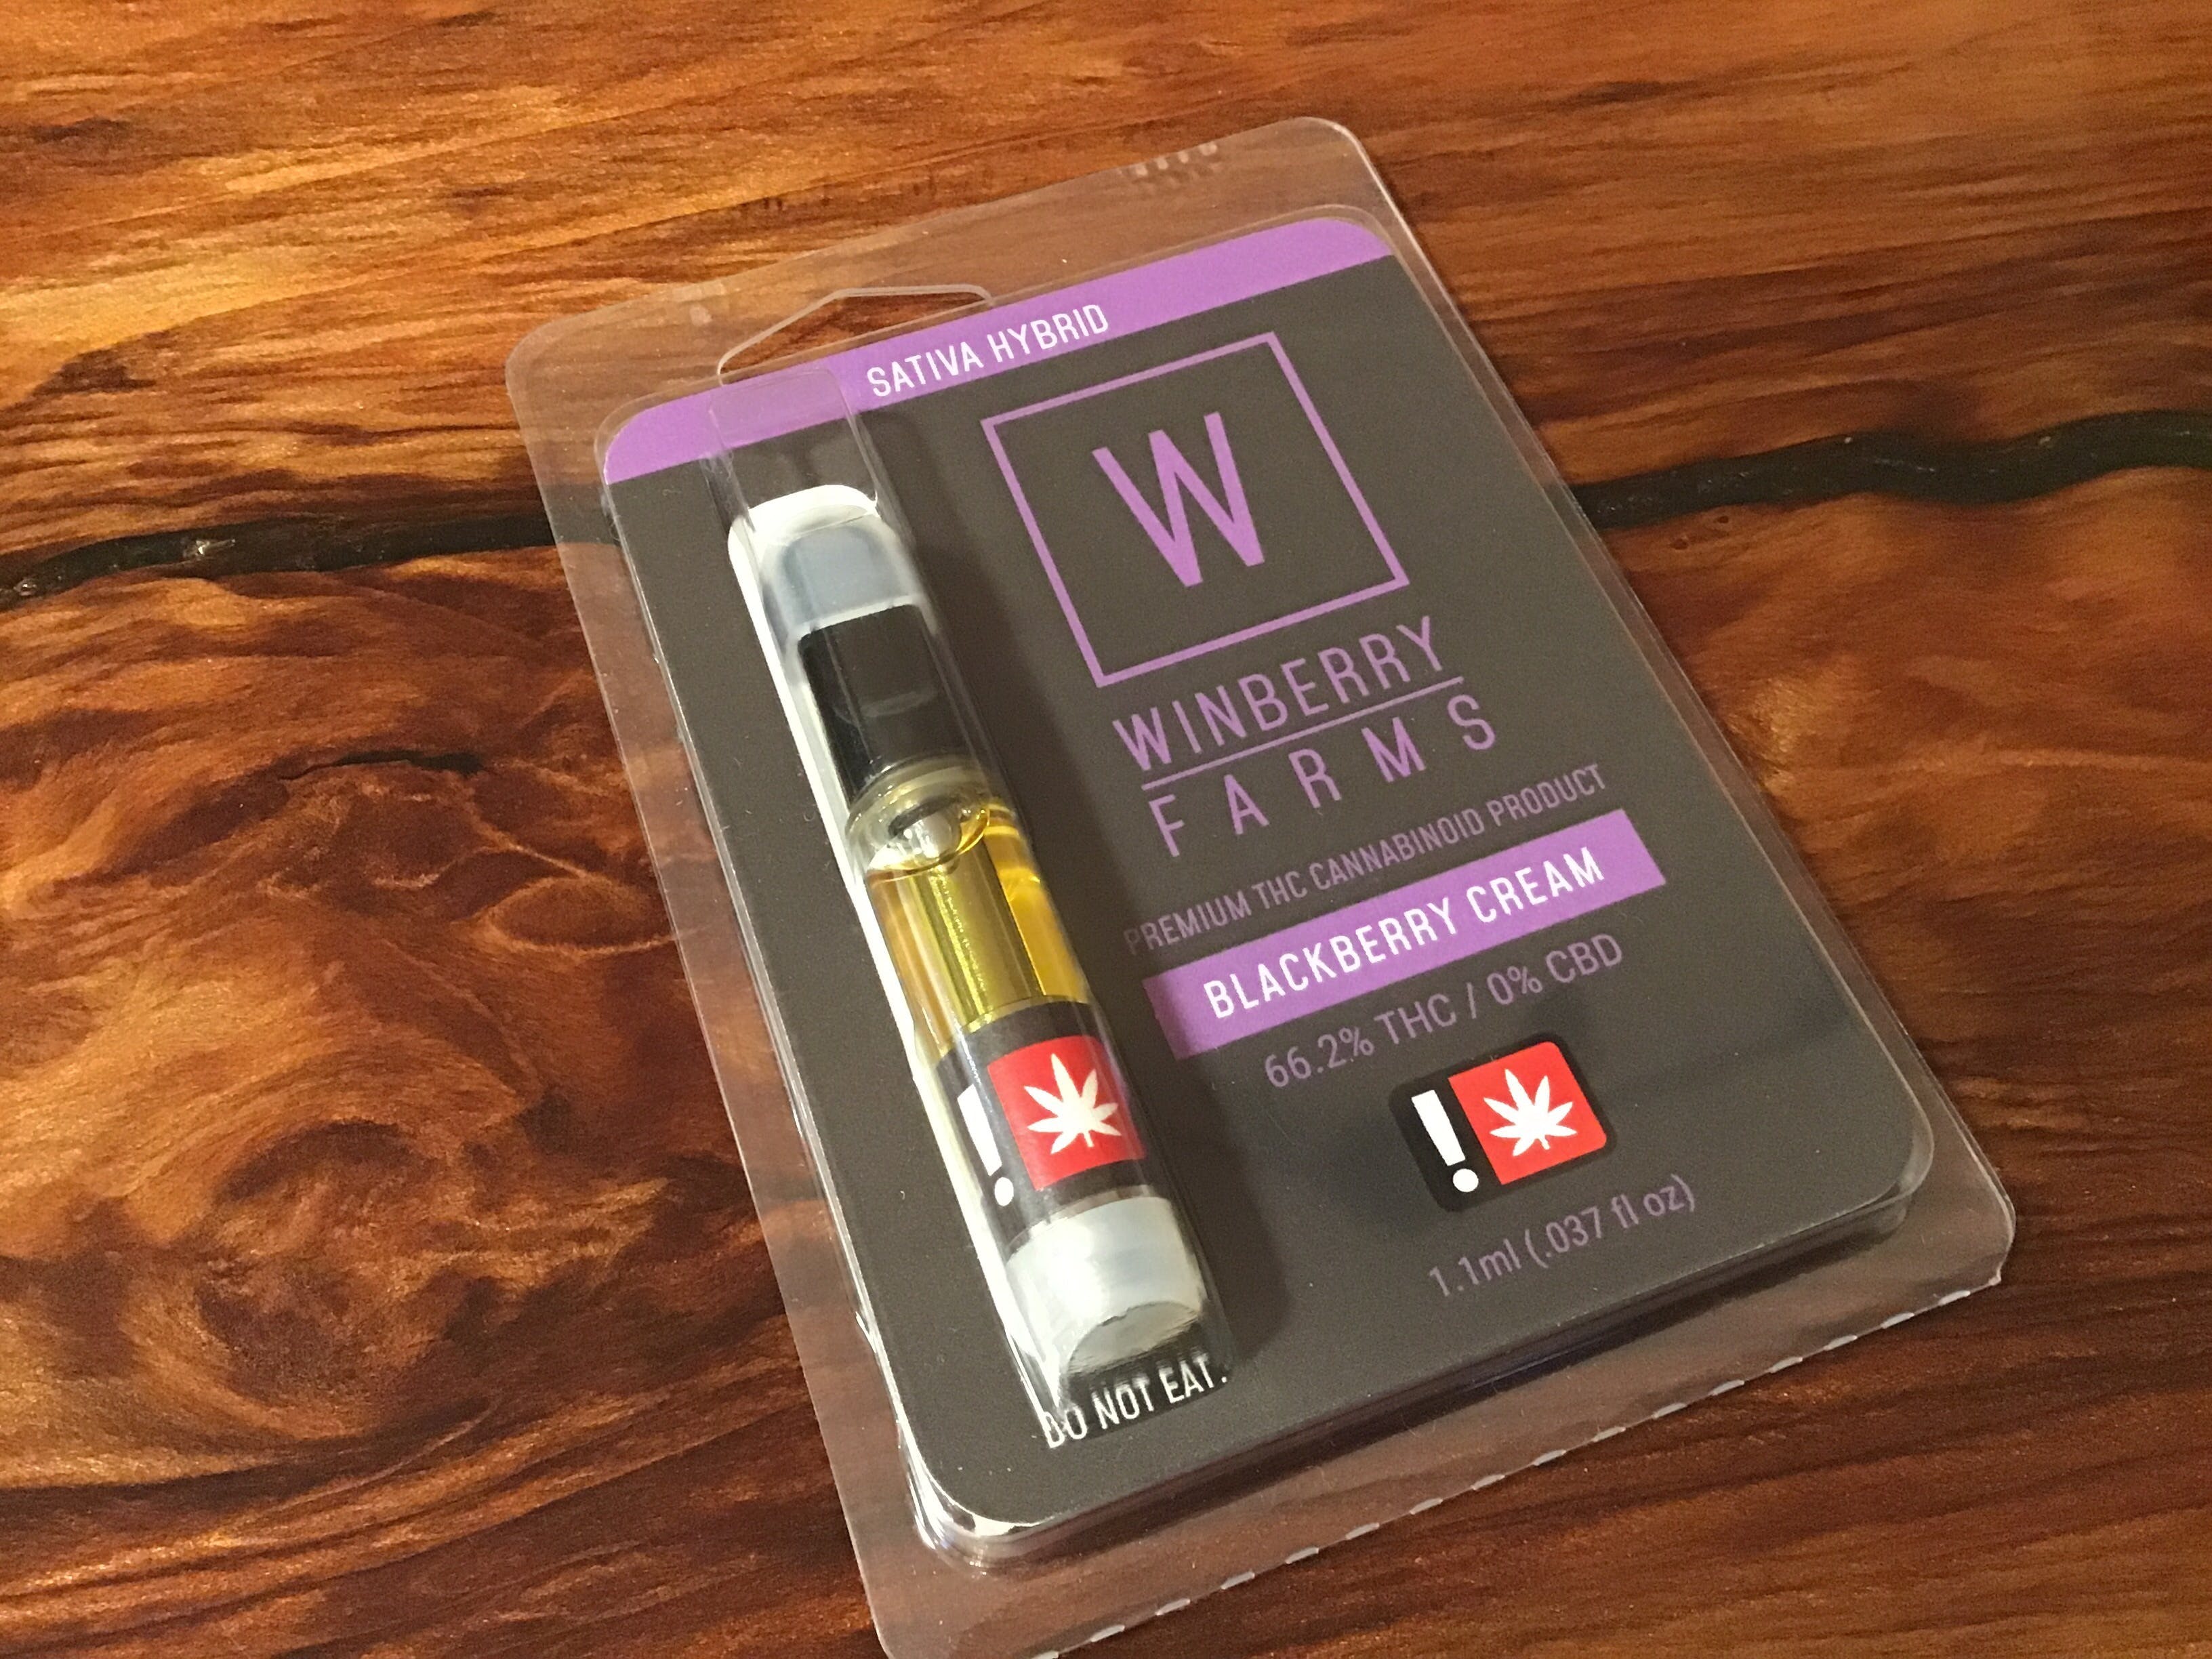 concentrate-winberry-farms-blackberry-cream-cartridge